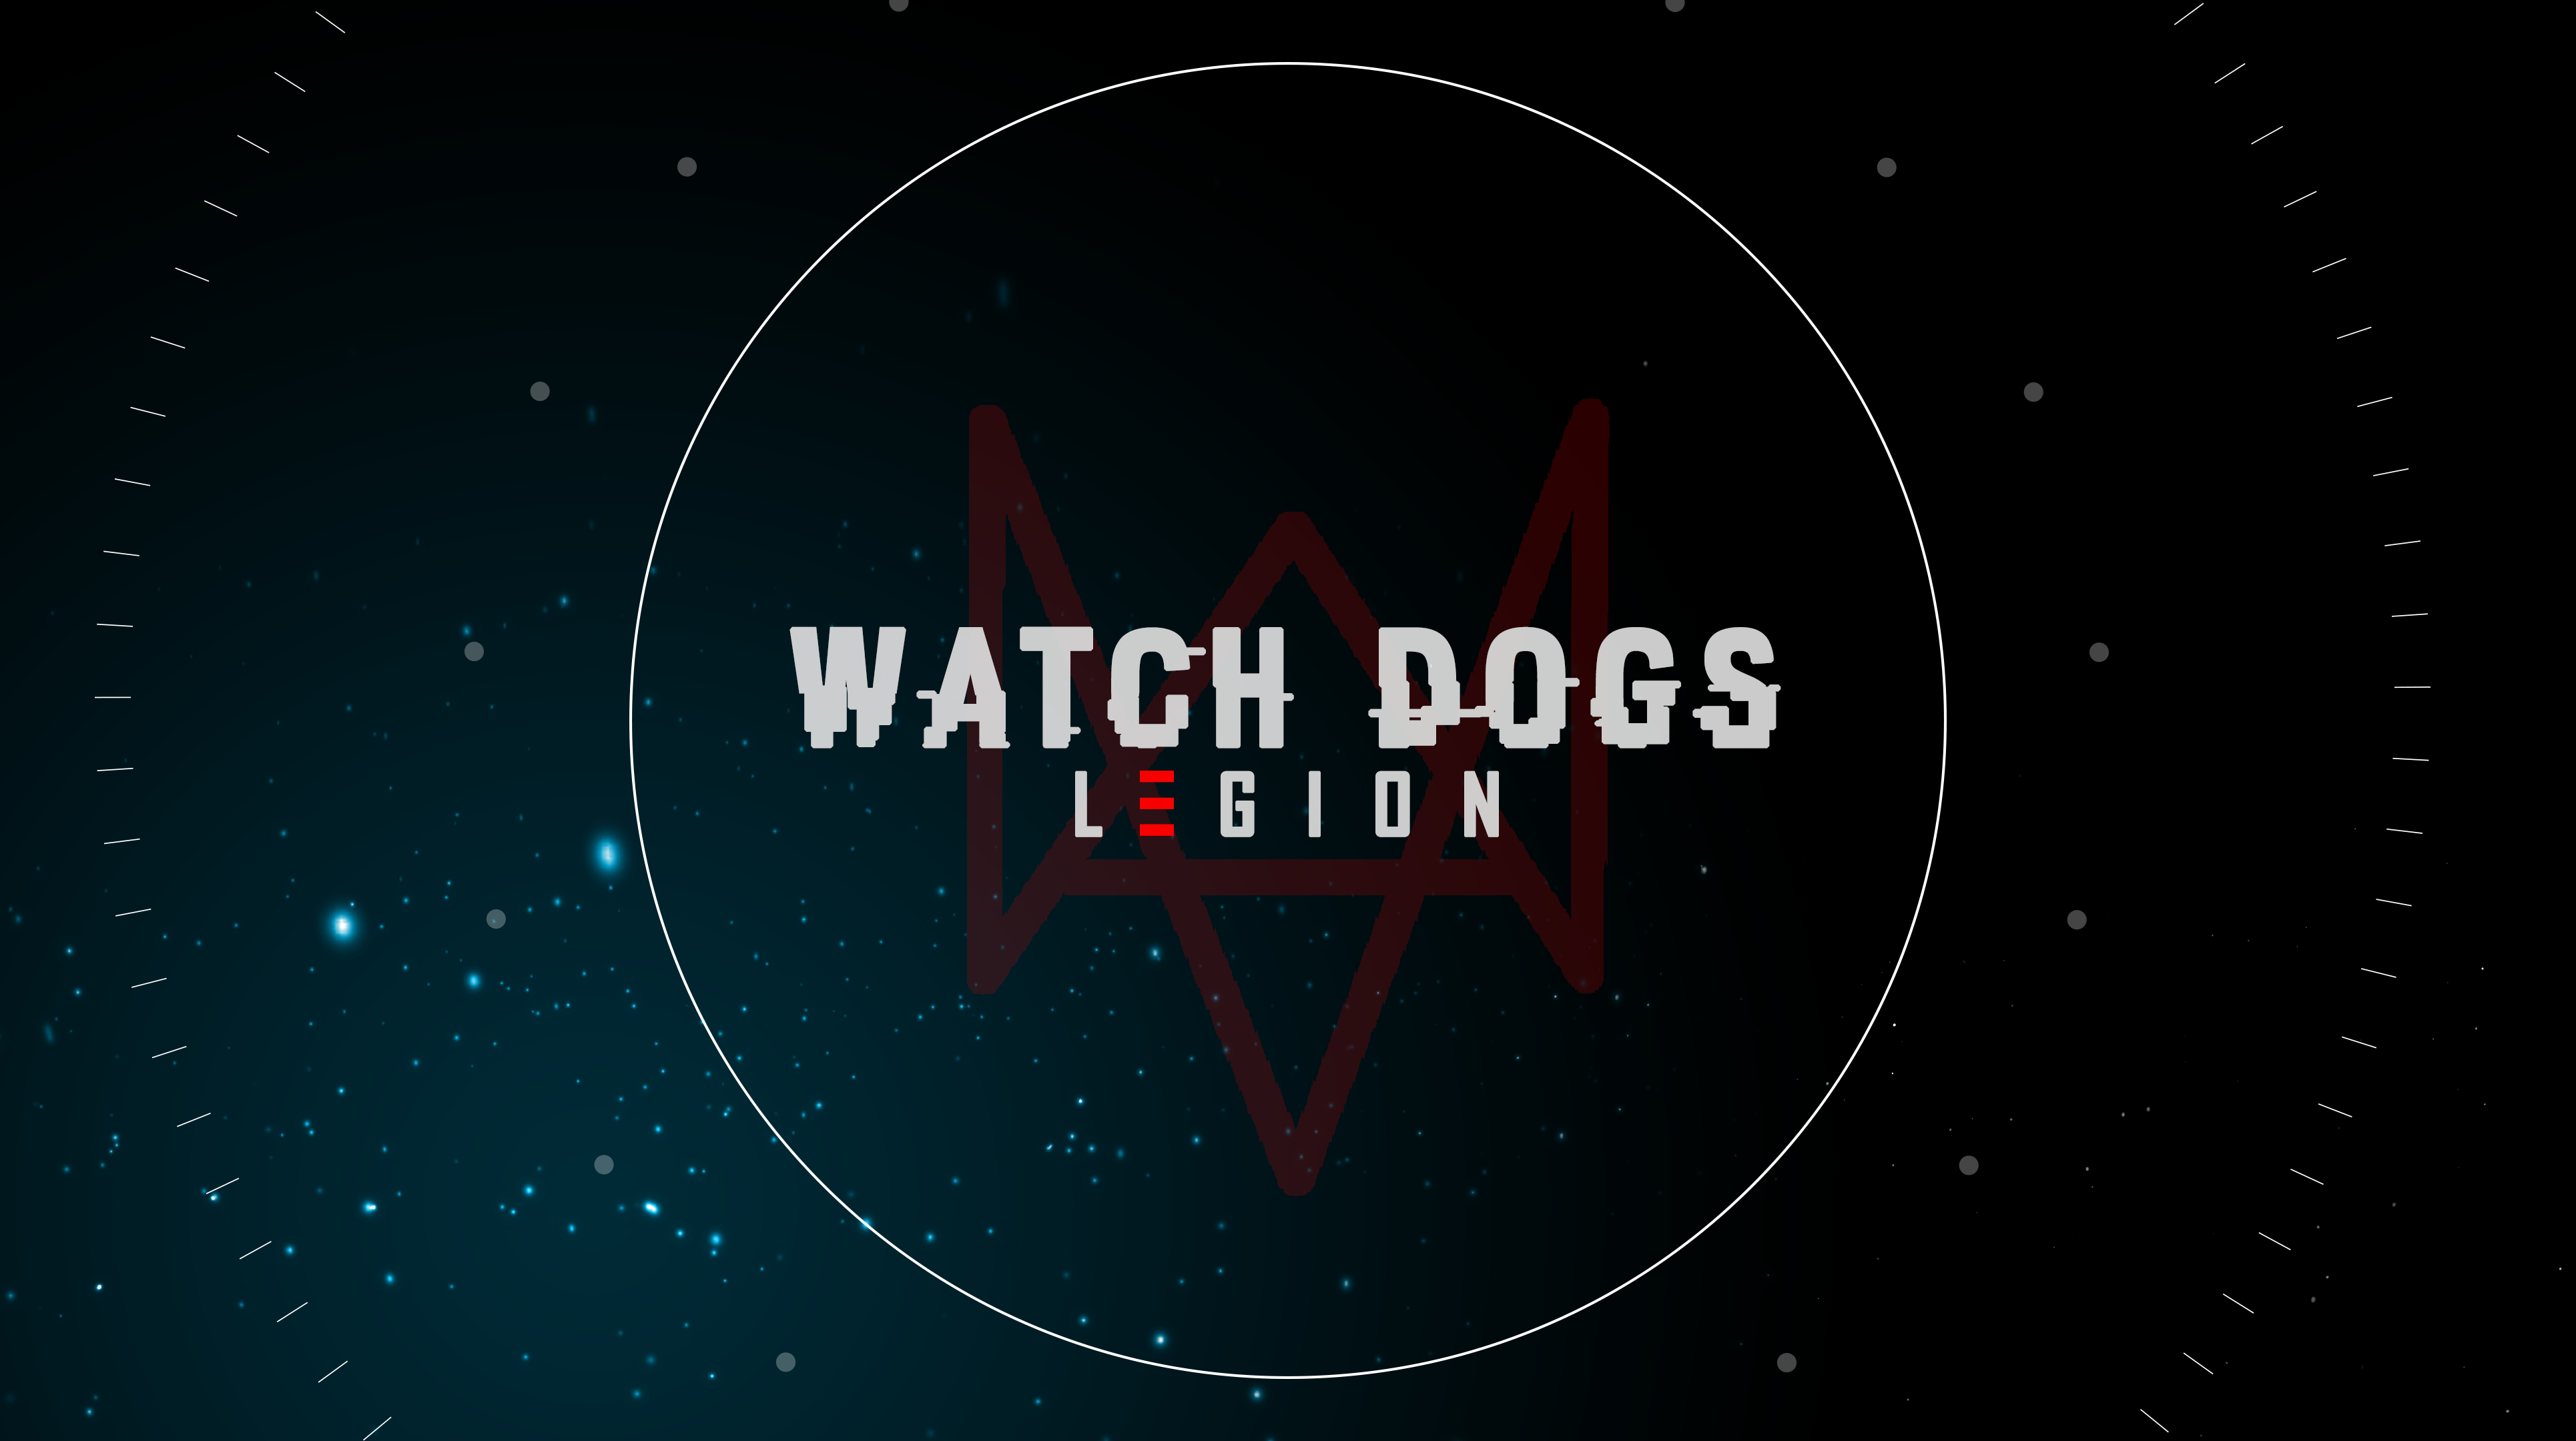 Watch Dogs Legion Logo Wallpaper, HD Games 4K Wallpapers, Images